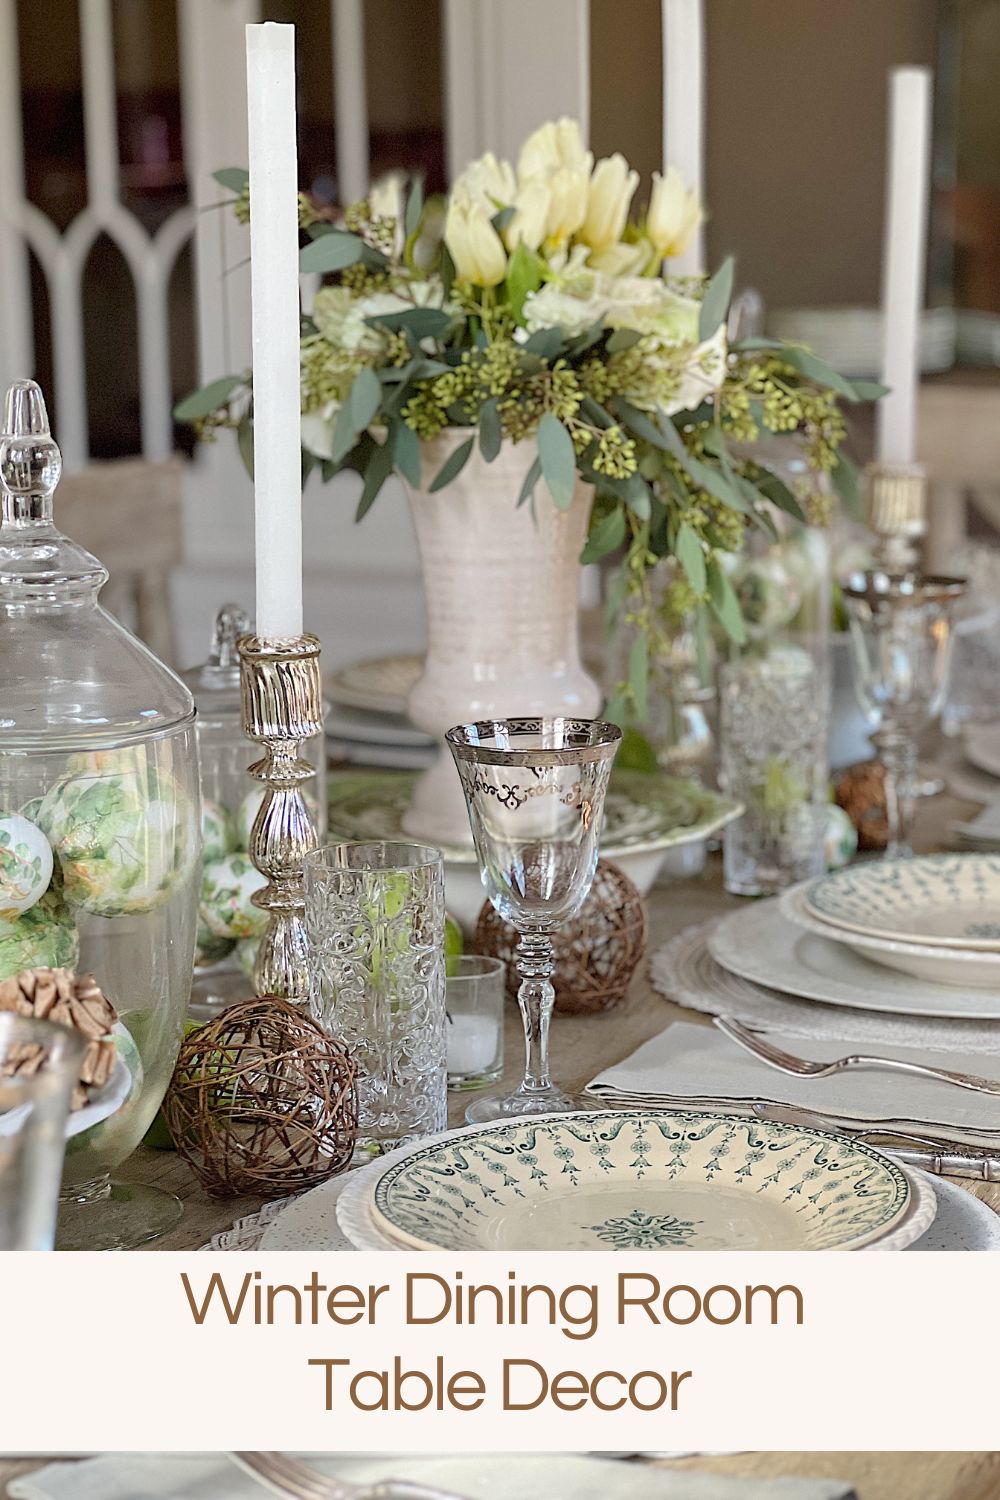 If you’ve vowed to spruce up your winter dining room table decor, then it’s time to put your decorator hat on! 